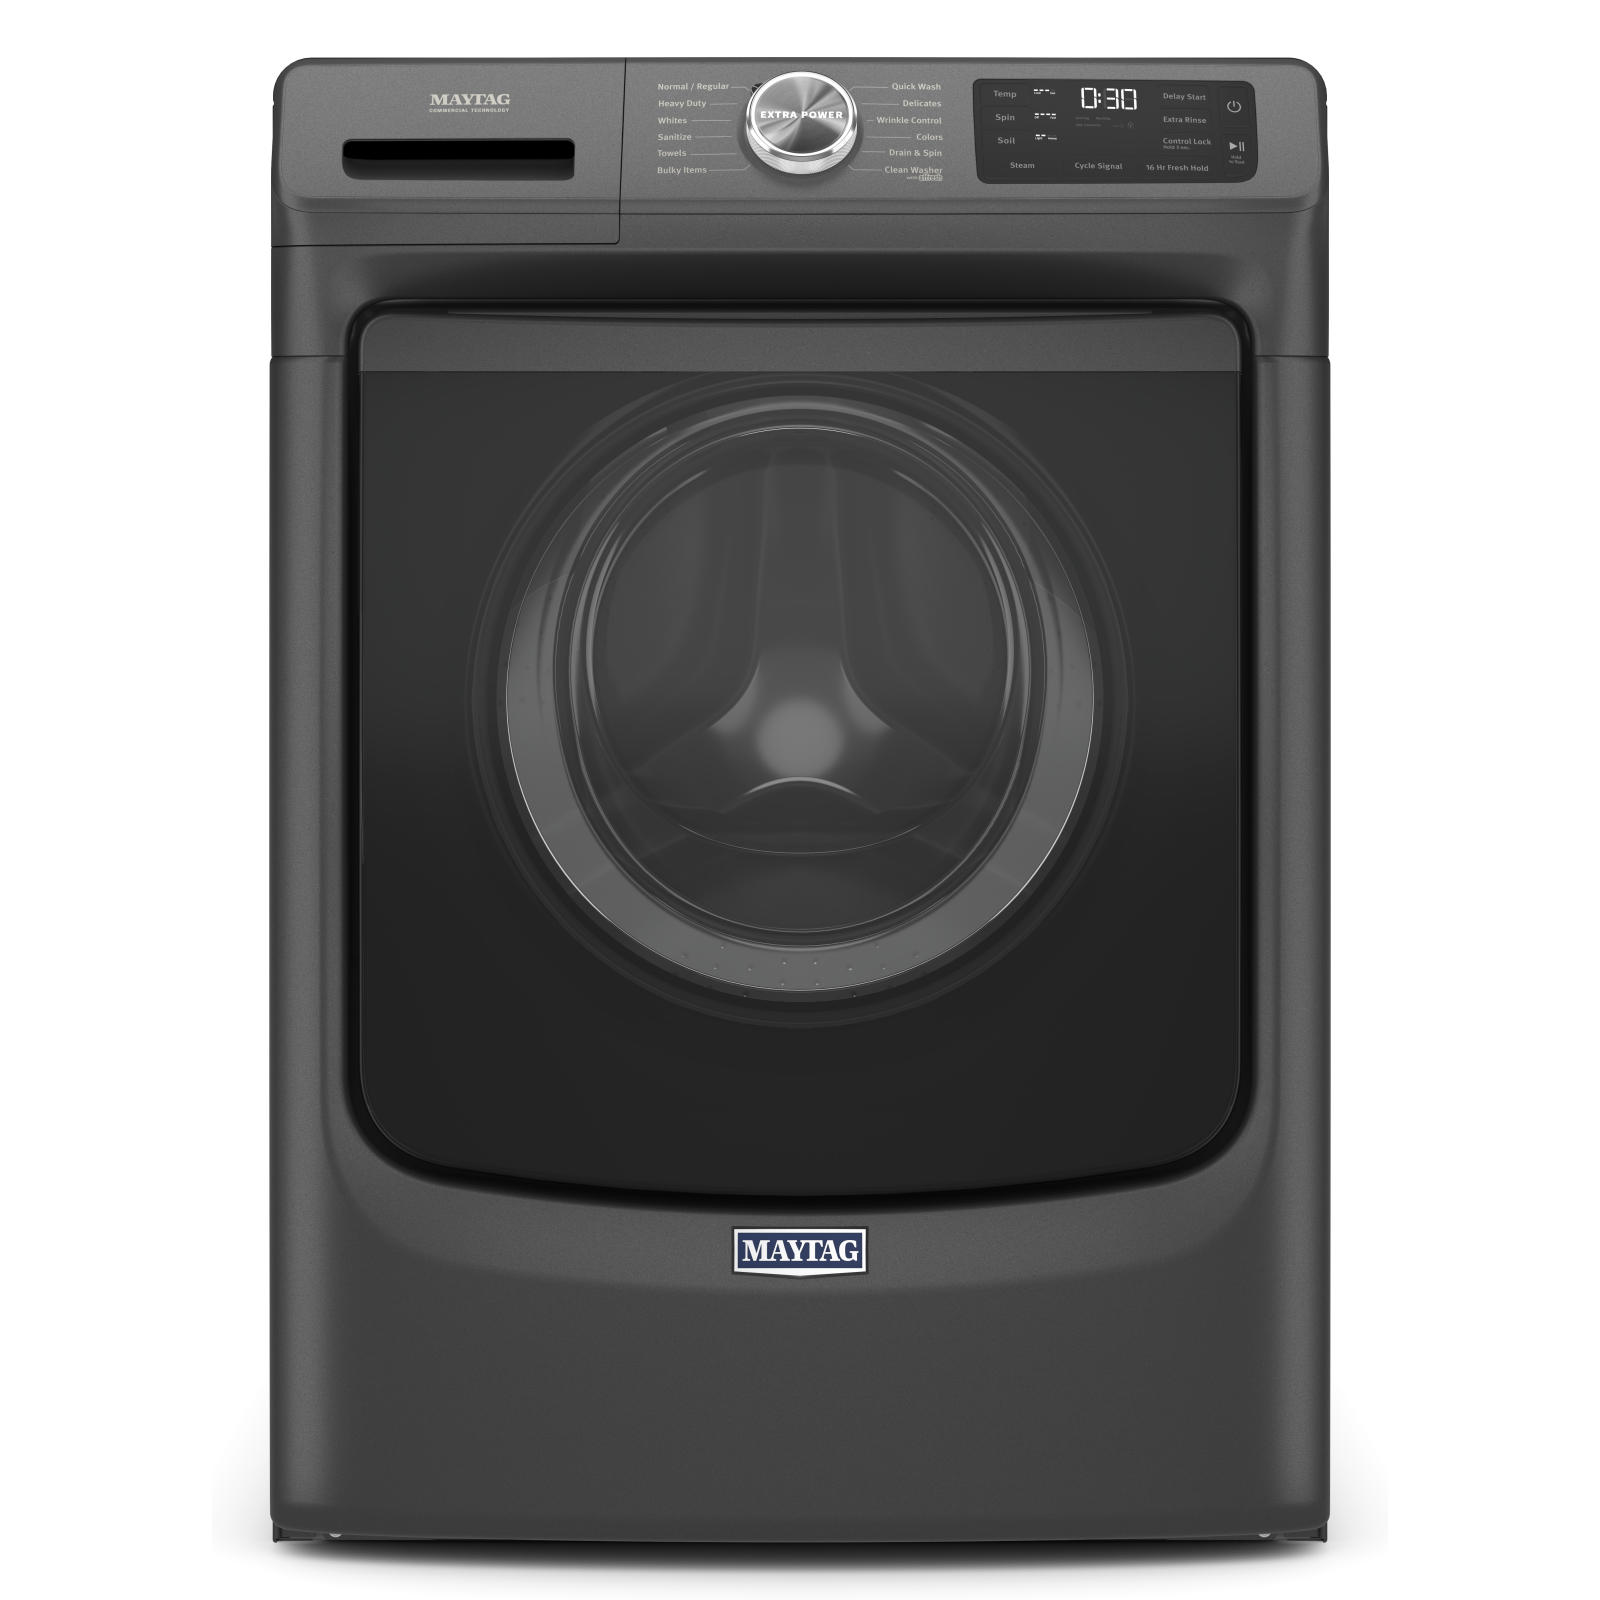 Maytag - 5.5 cu. Ft  Front Load Washer in Black - MHW6630MBK